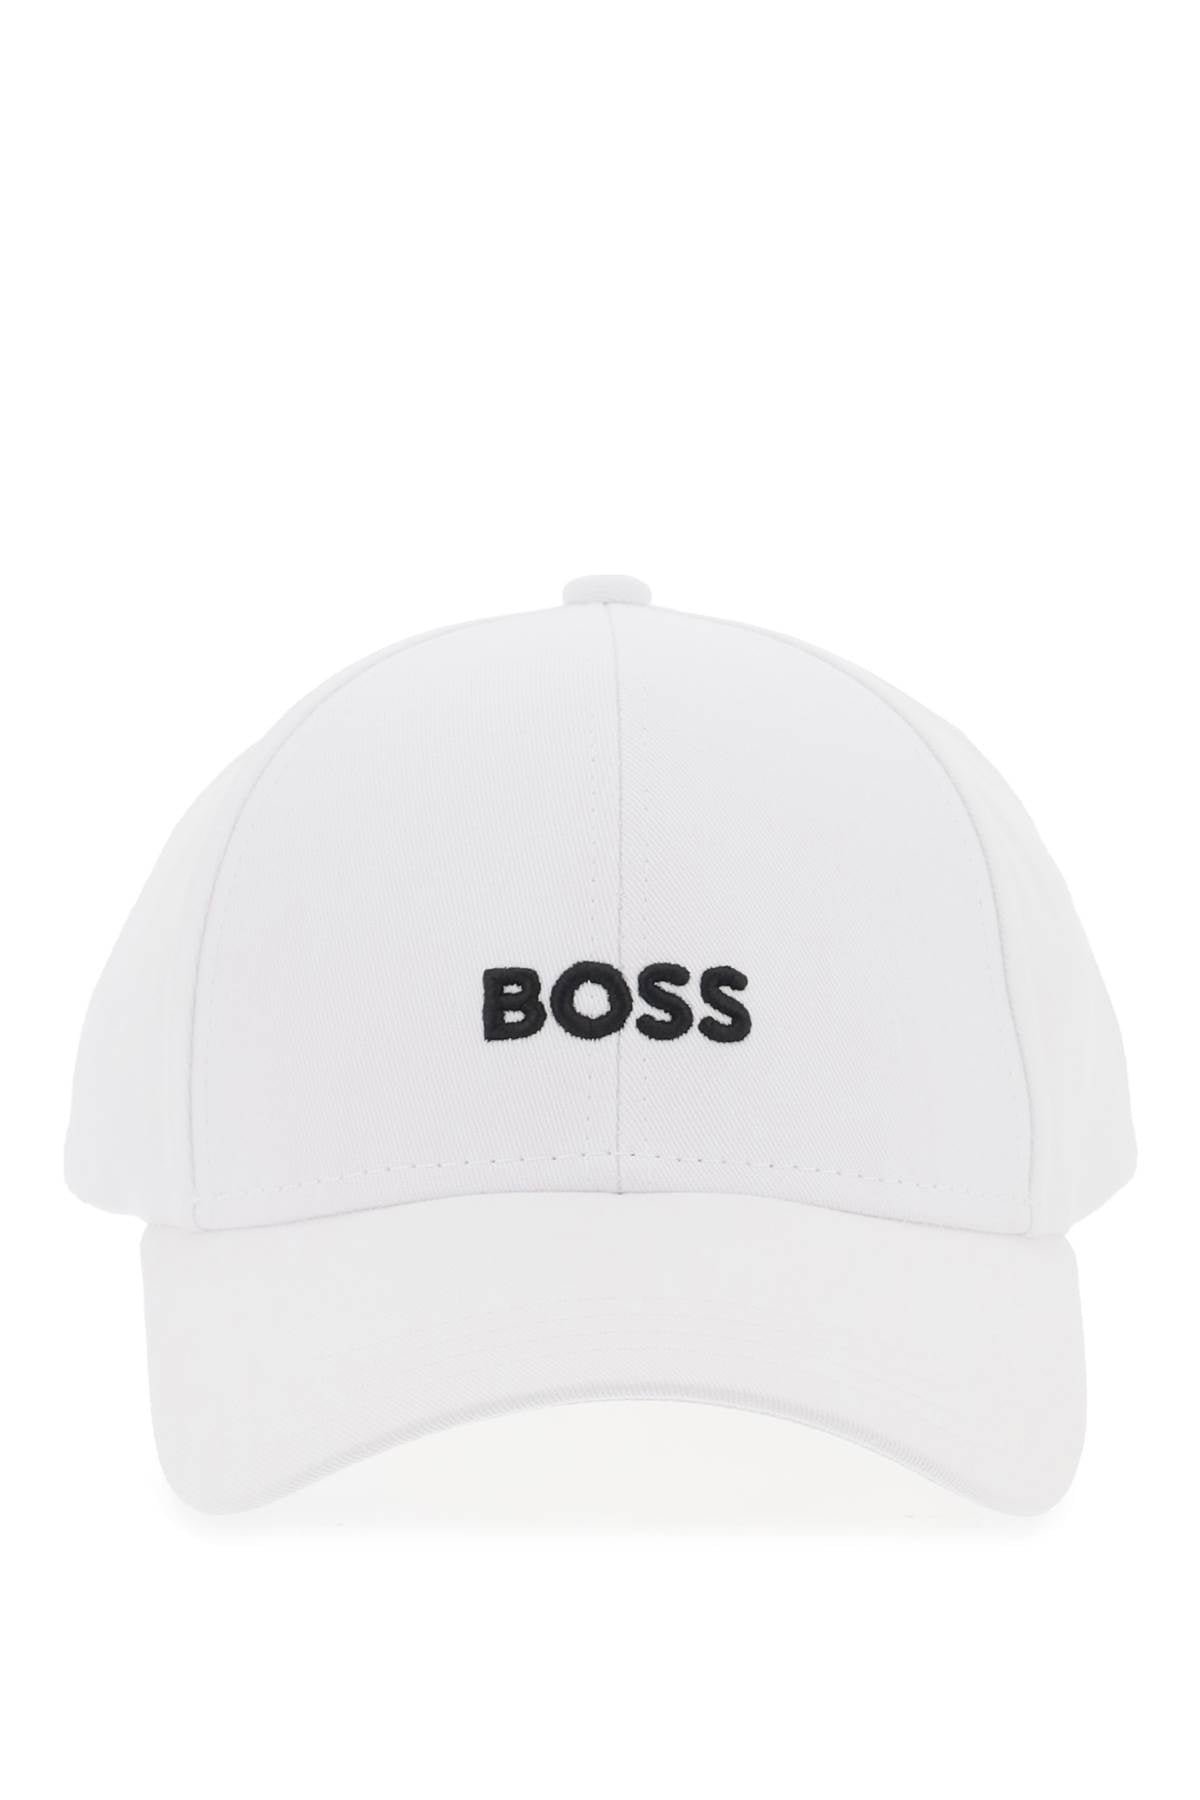 Boss baseball cap with embroidered logo 50495121 NATURAL